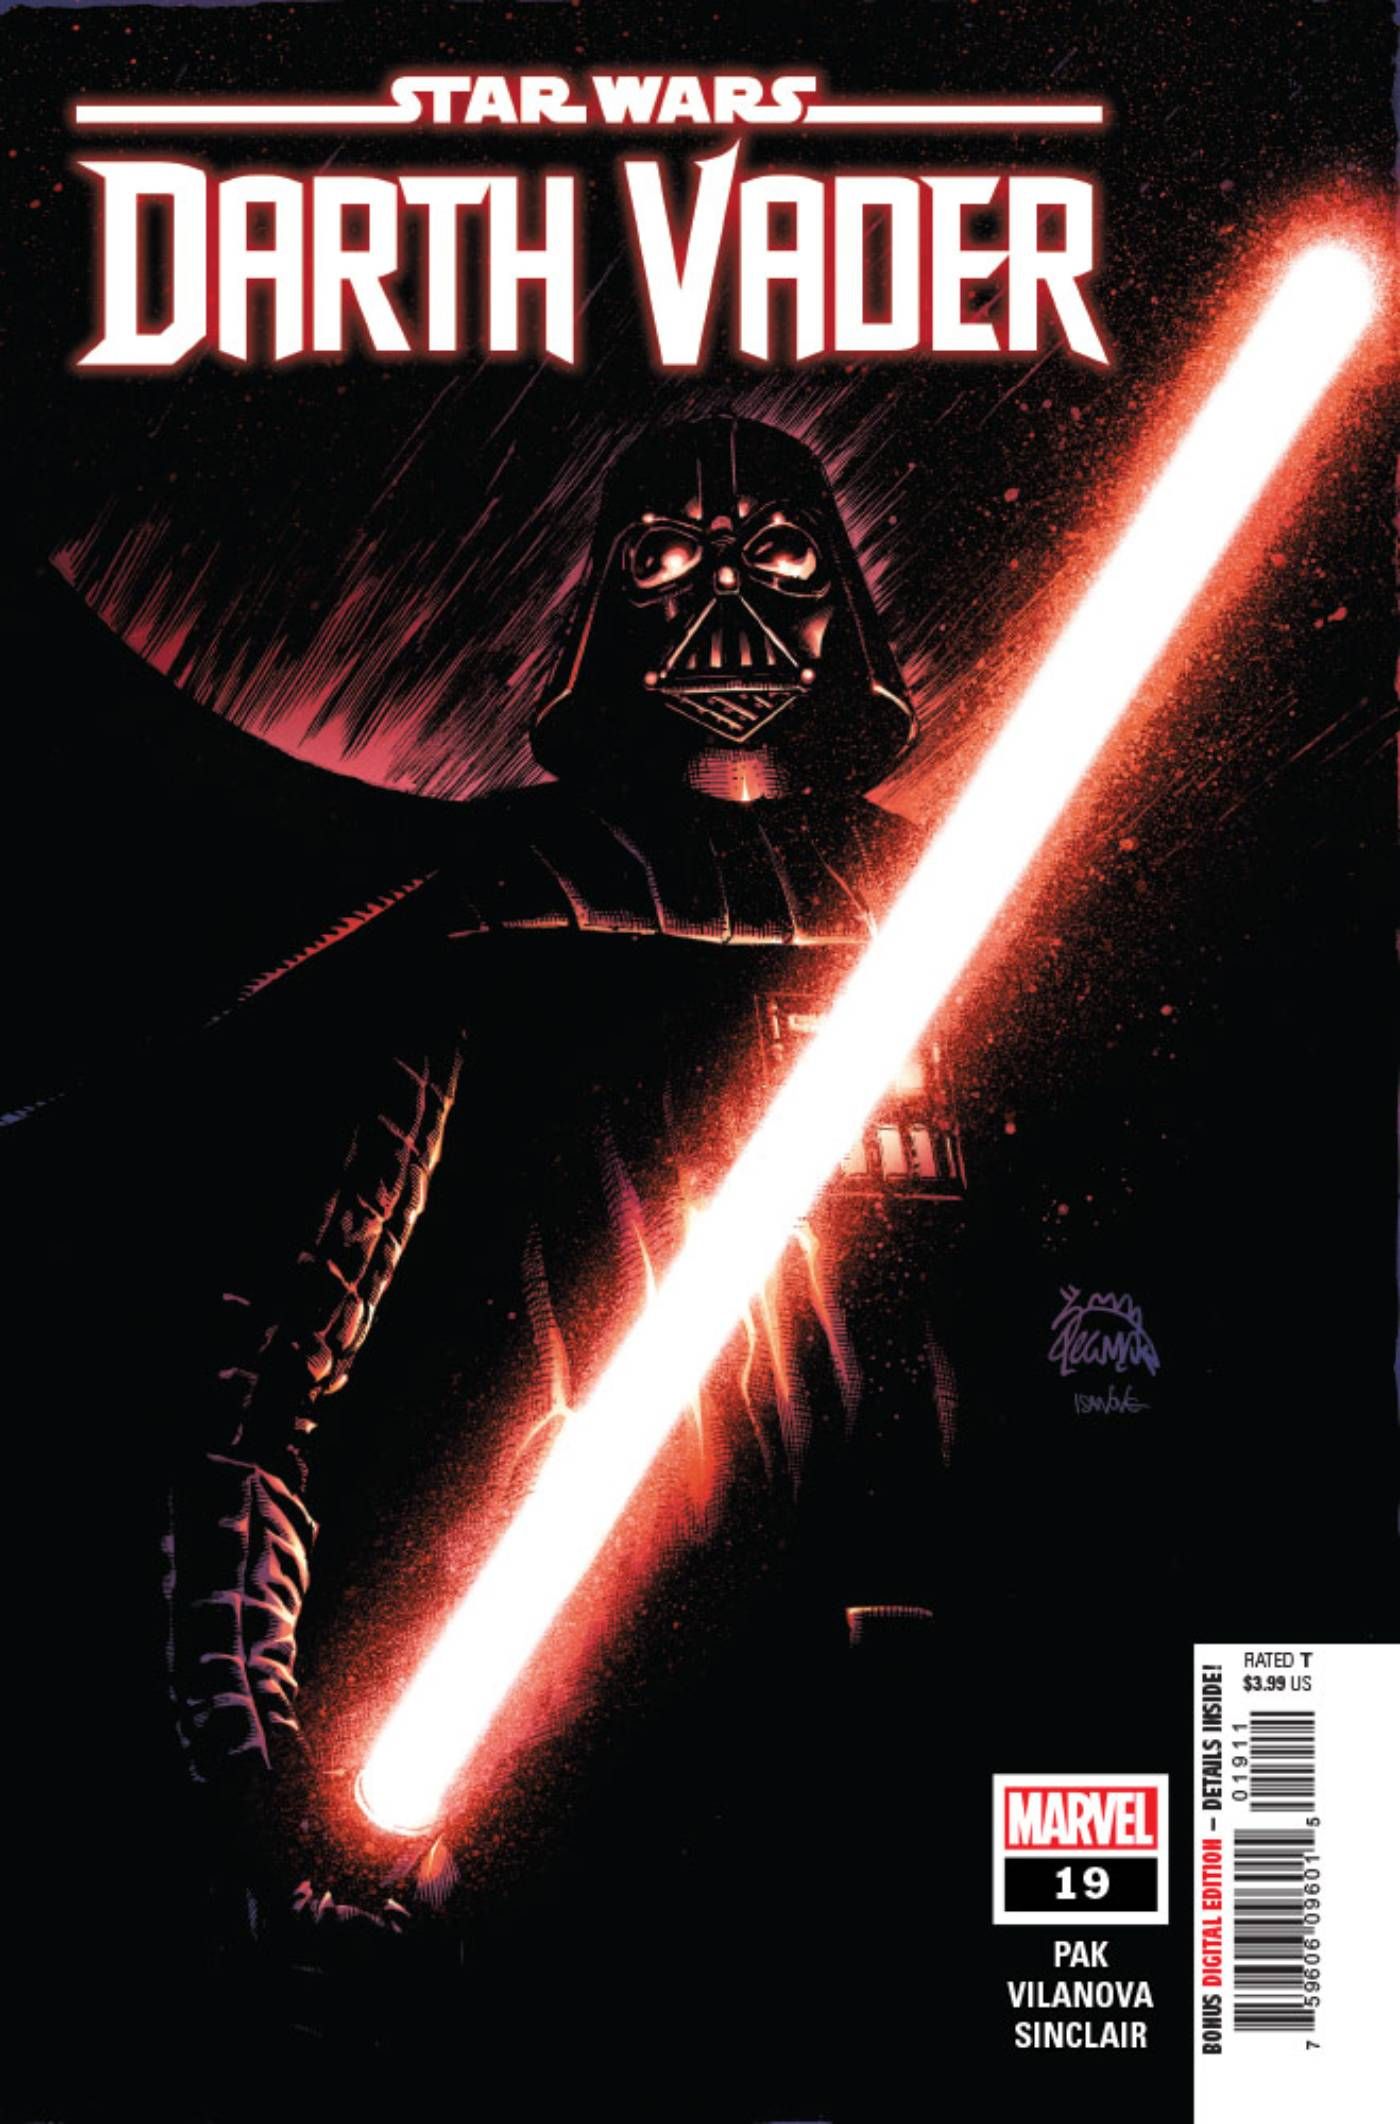 Darth Vader Has Turned His Mother’s Death Into A Weapon